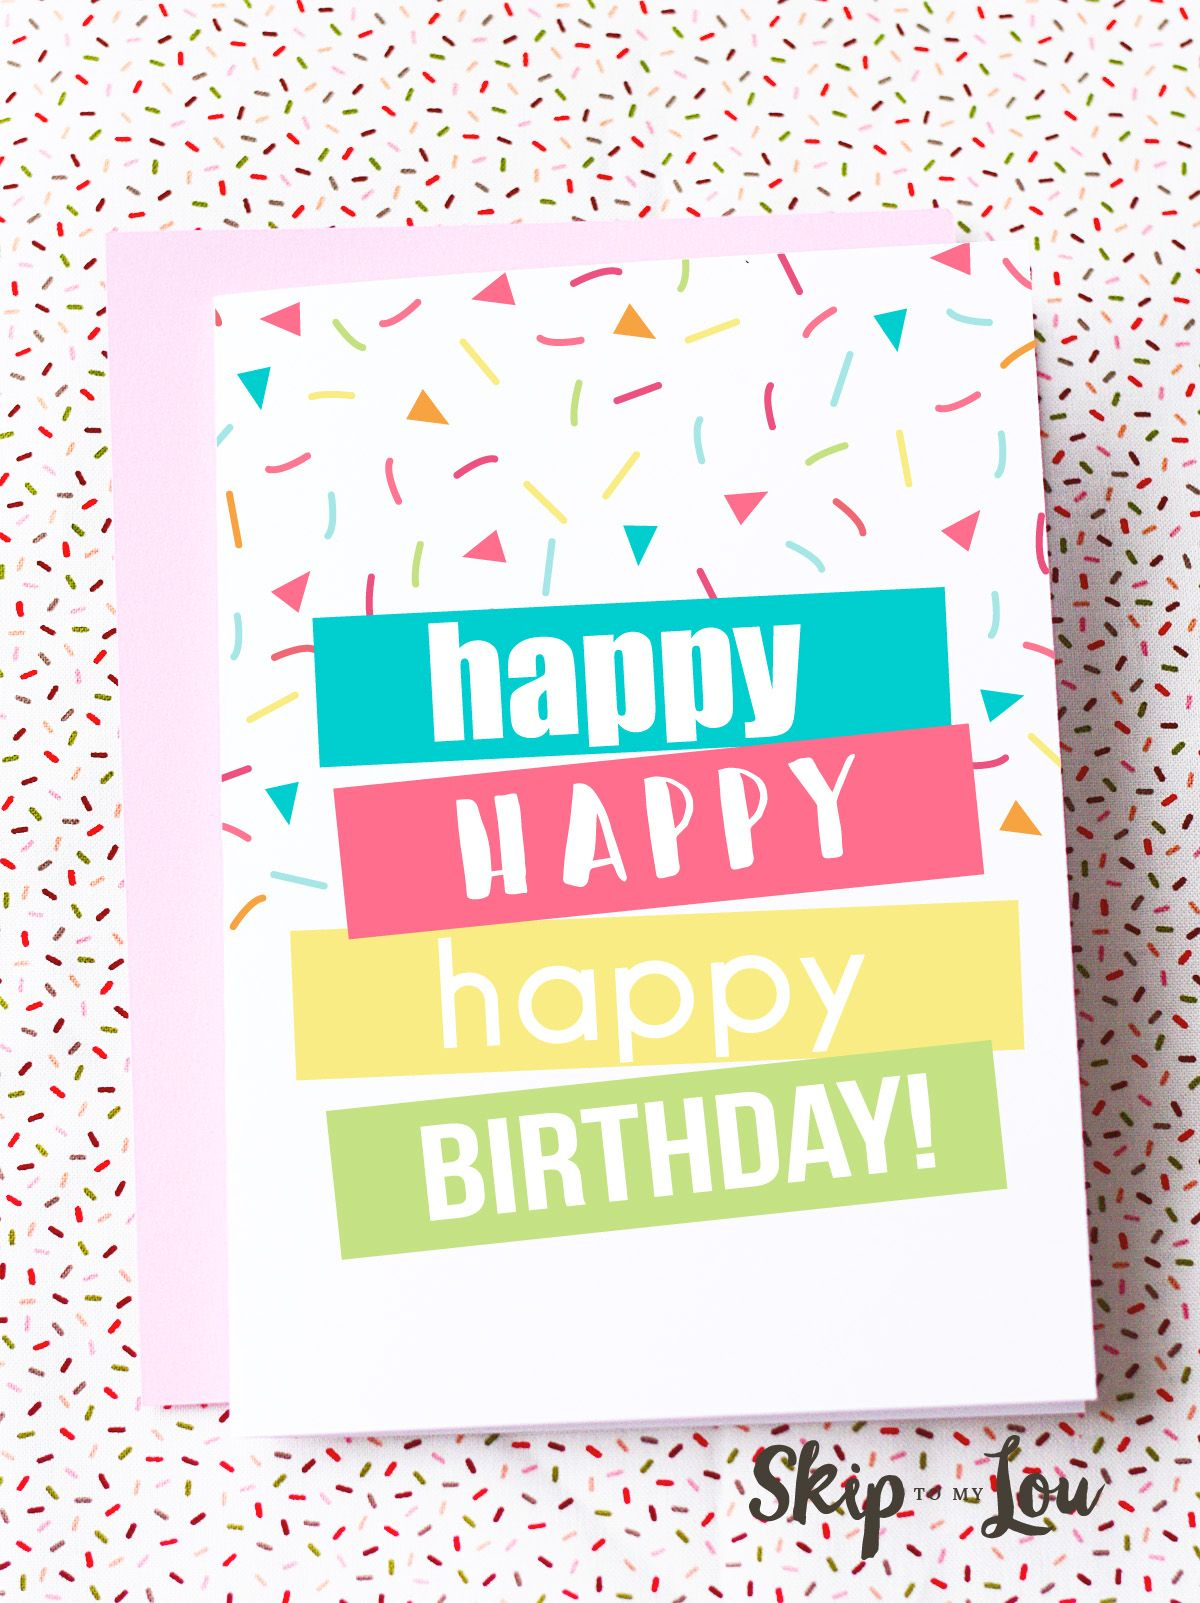 Free Printable Happy Birthday Card. Need A Last Minute Birthday Card - Free Printable Birthday Cards For Wife